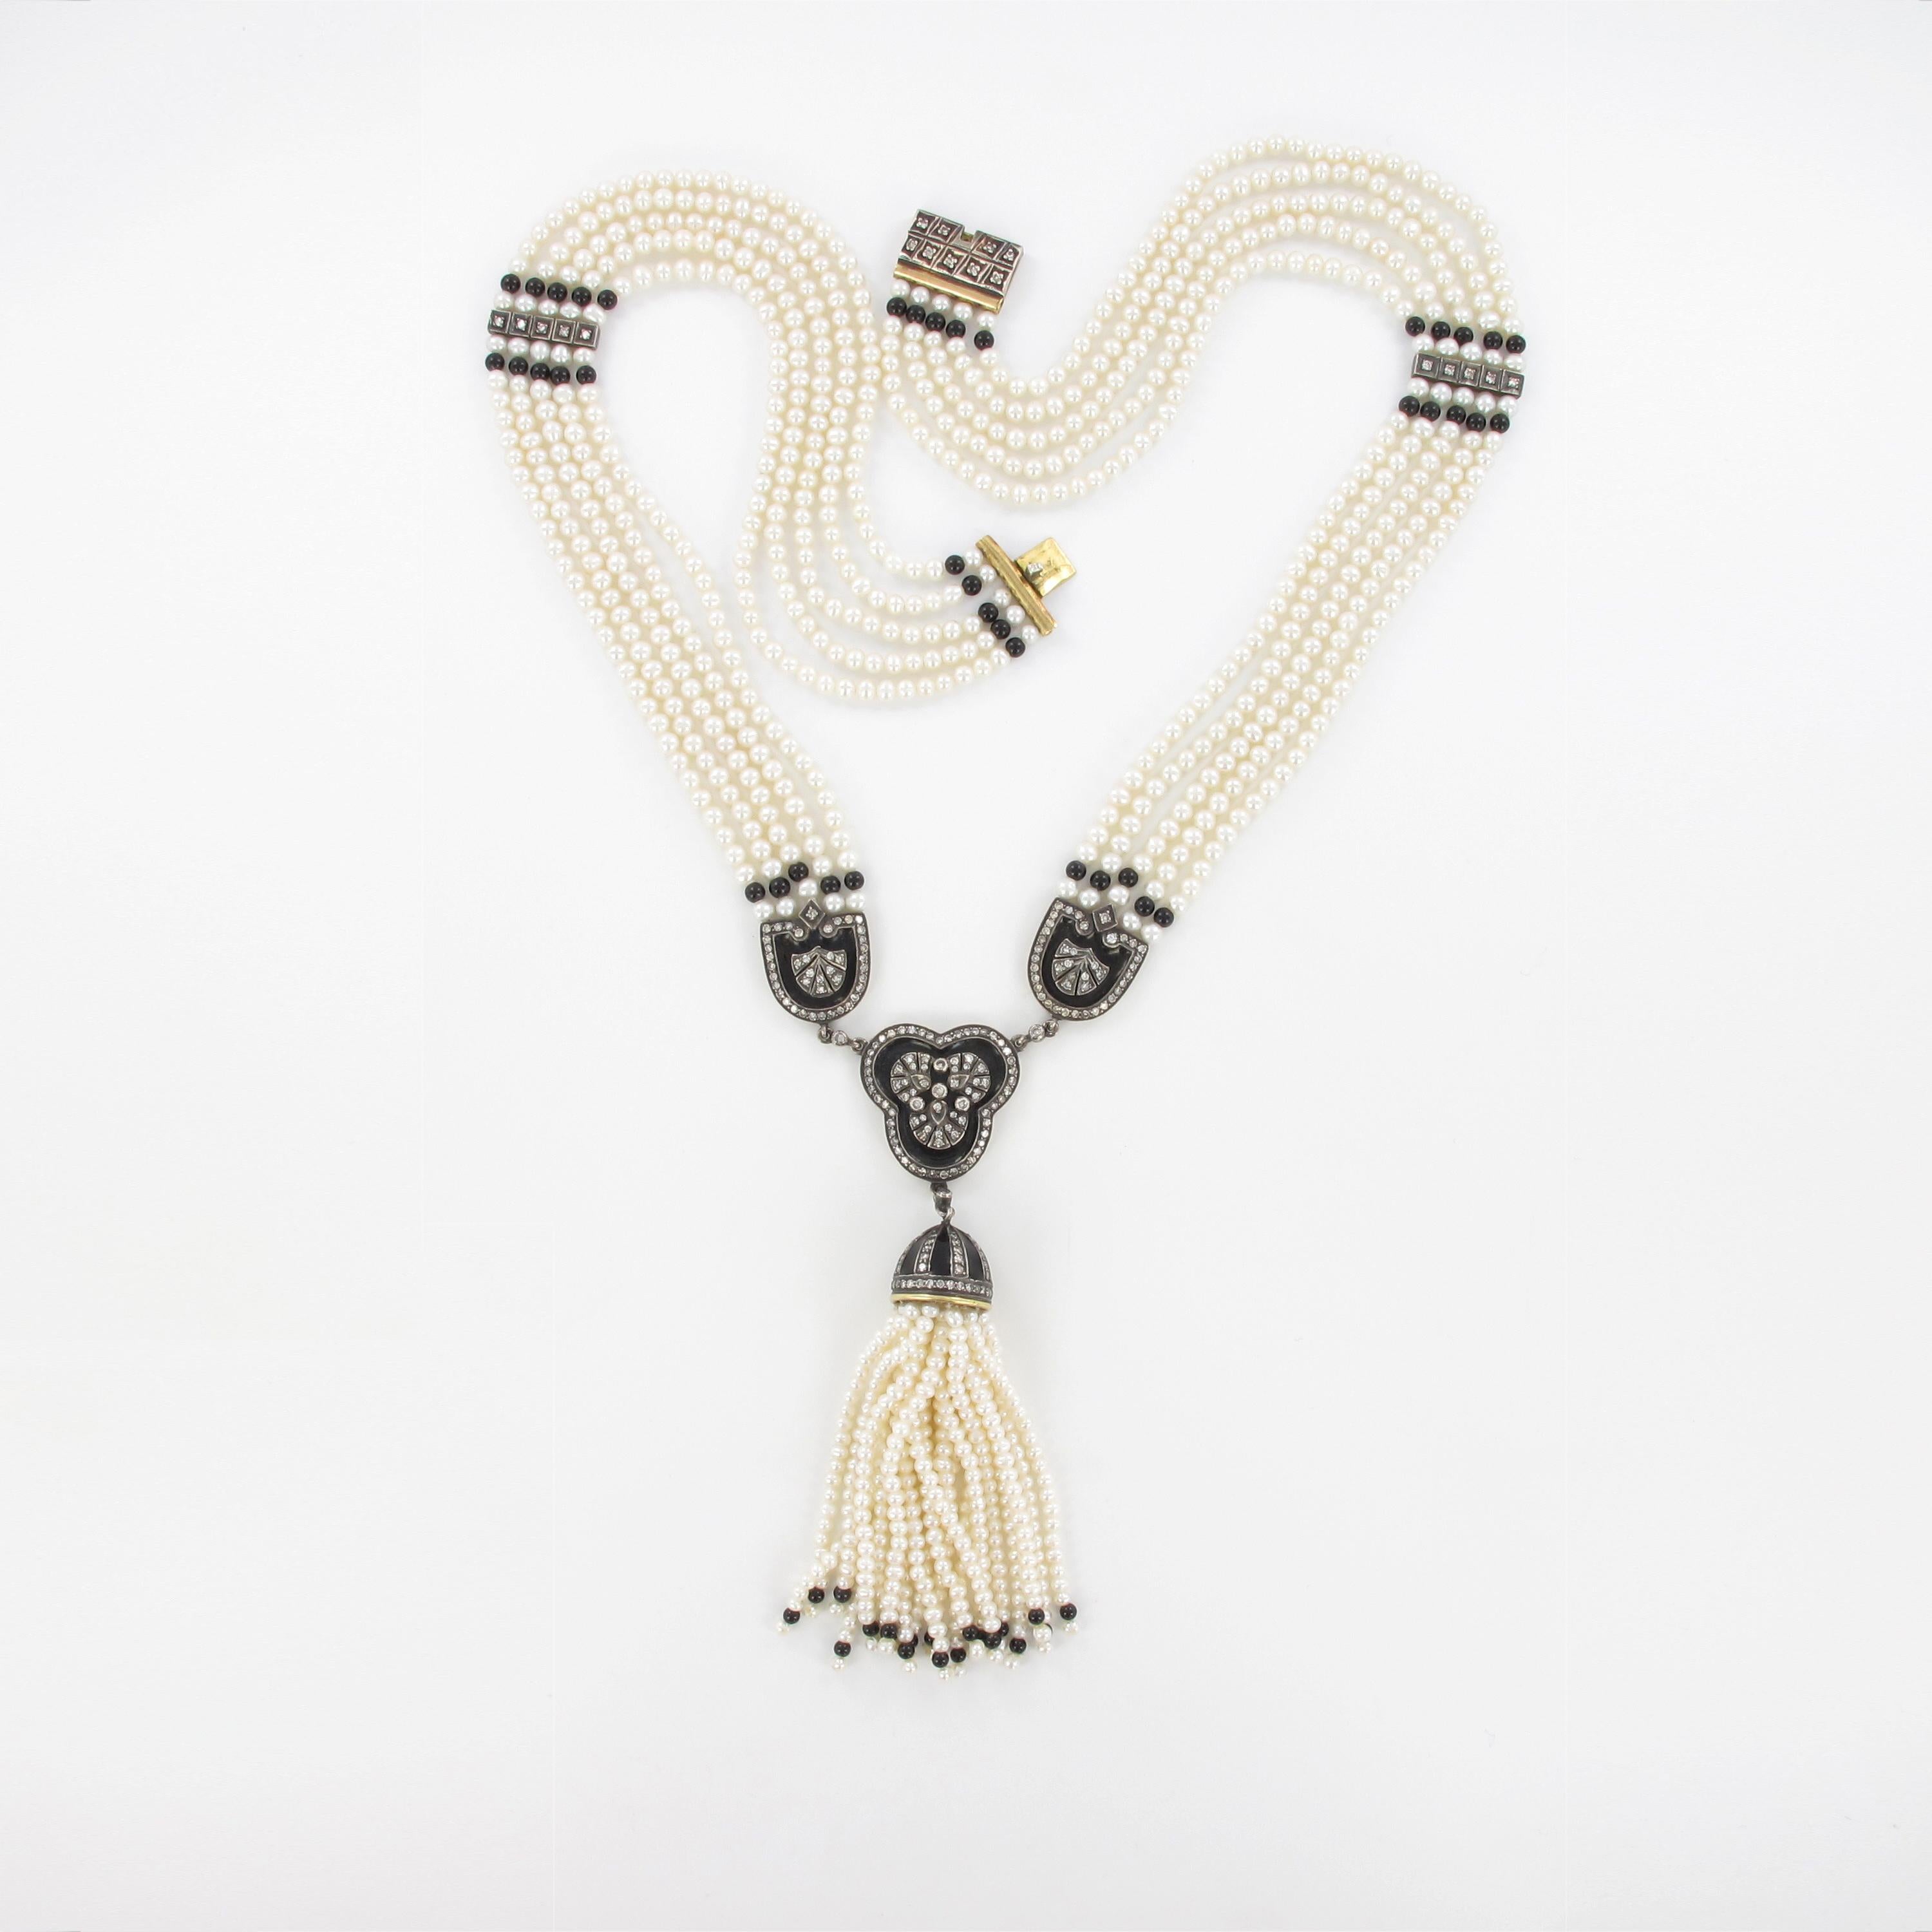 This highly decorative and romantic necklace consists of 5 strands of cultured pearls and black chalcedony beads ranging from 3.2 to 3.7 mm in diameter. The centre is decorated by a cheerfully swinging tassel consisting of 20 shorter strands of